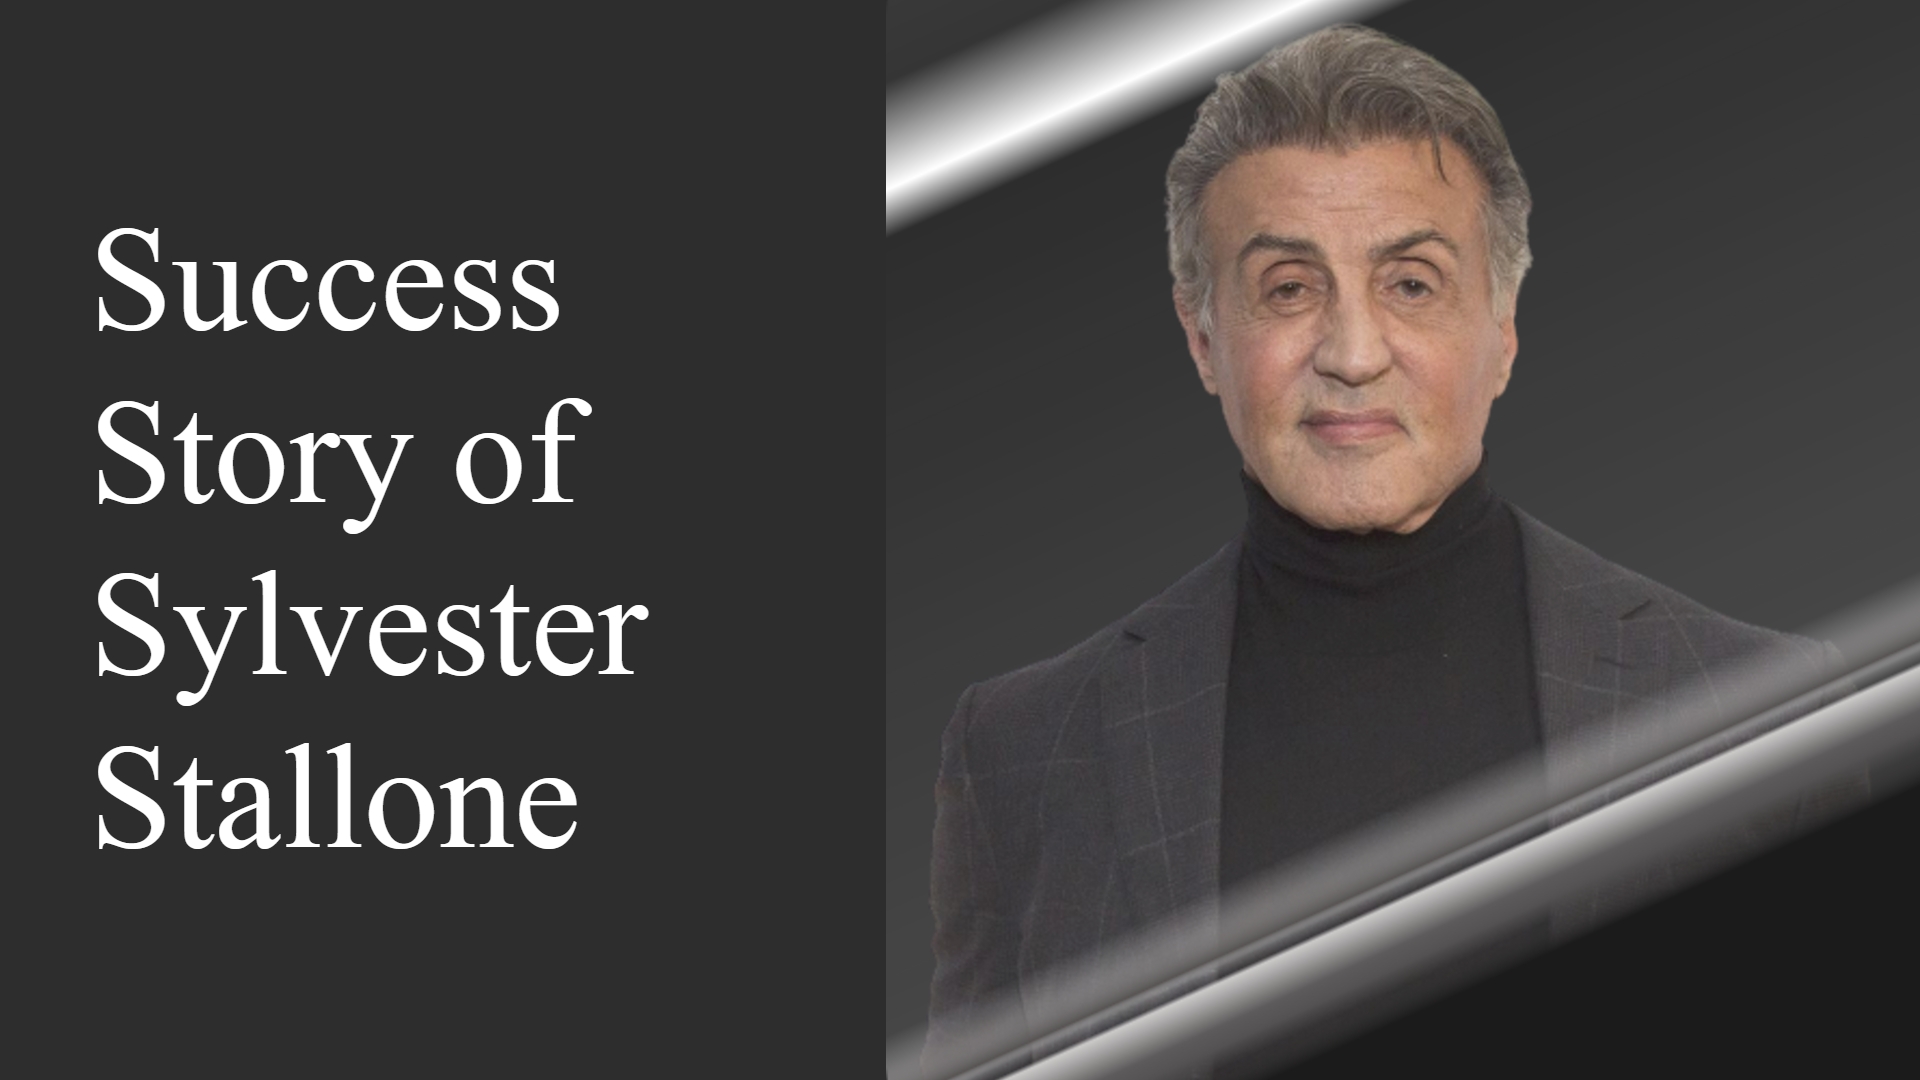 Sylvester Stallone Success Story